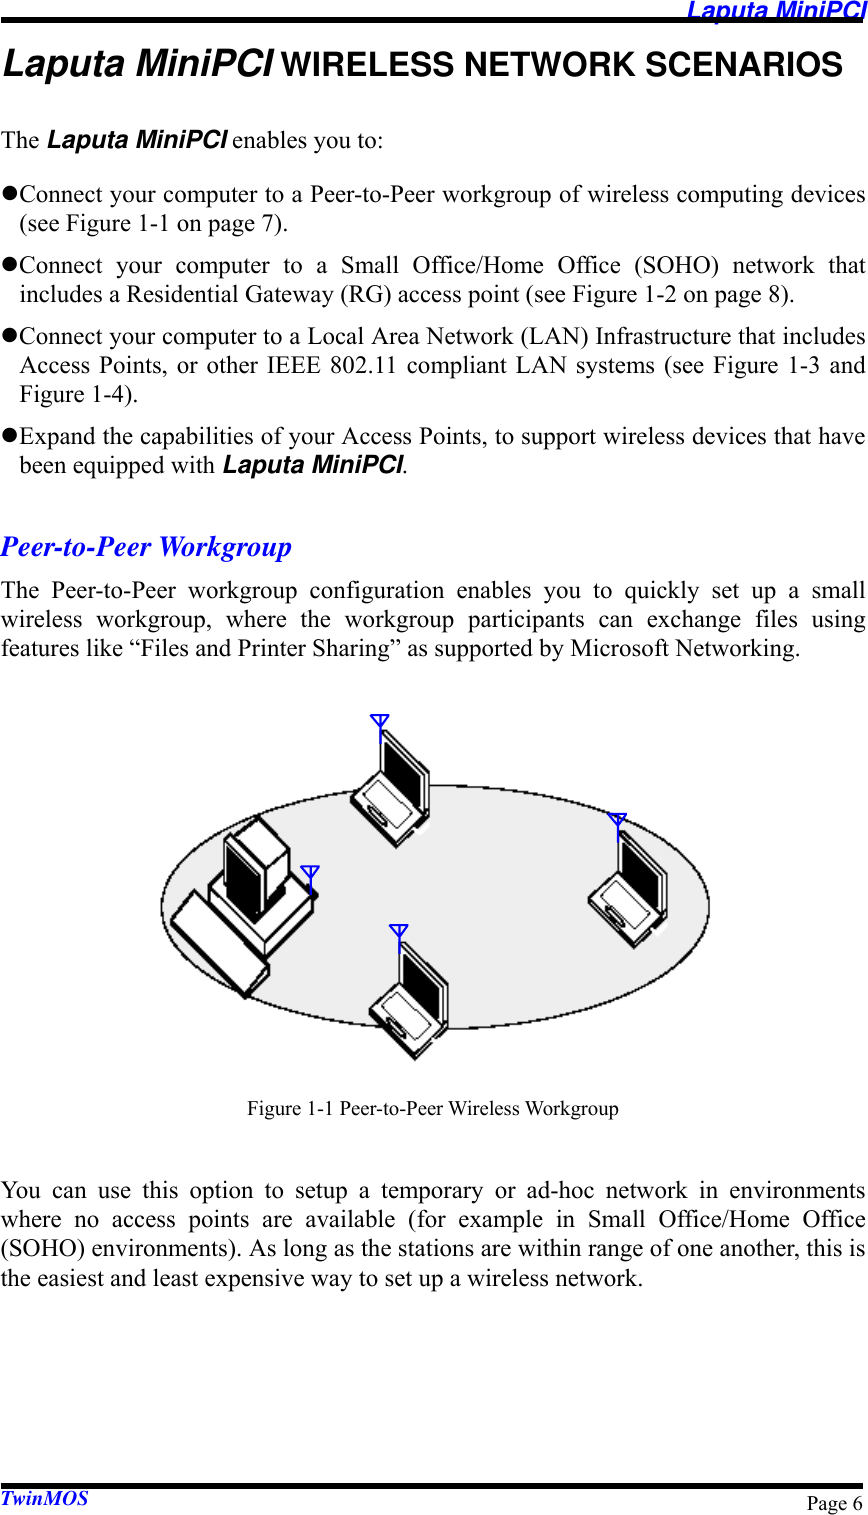   Laputa MiniPCI TwinMOS  Page 6Laputa MiniPCI WIRELESS NETWORK SCENARIOS The Laputa MiniPCI enables you to: z Connect your computer to a Peer-to-Peer workgroup of wireless computing devices (see Figure 1-1 on page 7). z Connect your computer to a Small Office/Home Office (SOHO) network that includes a Residential Gateway (RG) access point (see Figure 1-2 on page 8). z Connect your computer to a Local Area Network (LAN) Infrastructure that includes Access Points, or other IEEE 802.11 compliant LAN systems (see Figure 1-3 and Figure 1-4). z Expand the capabilities of your Access Points, to support wireless devices that have been equipped with Laputa MiniPCI.  Peer-to-Peer Workgroup The Peer-to-Peer workgroup configuration enables you to quickly set up a small wireless workgroup, where the workgroup participants can exchange files using features like “Files and Printer Sharing” as supported by Microsoft Networking.           Figure 1-1 Peer-to-Peer Wireless Workgroup  You can use this option to setup a temporary or ad-hoc network in environments where no access points are available (for example in Small Office/Home Office (SOHO) environments). As long as the stations are within range of one another, this is the easiest and least expensive way to set up a wireless network. 